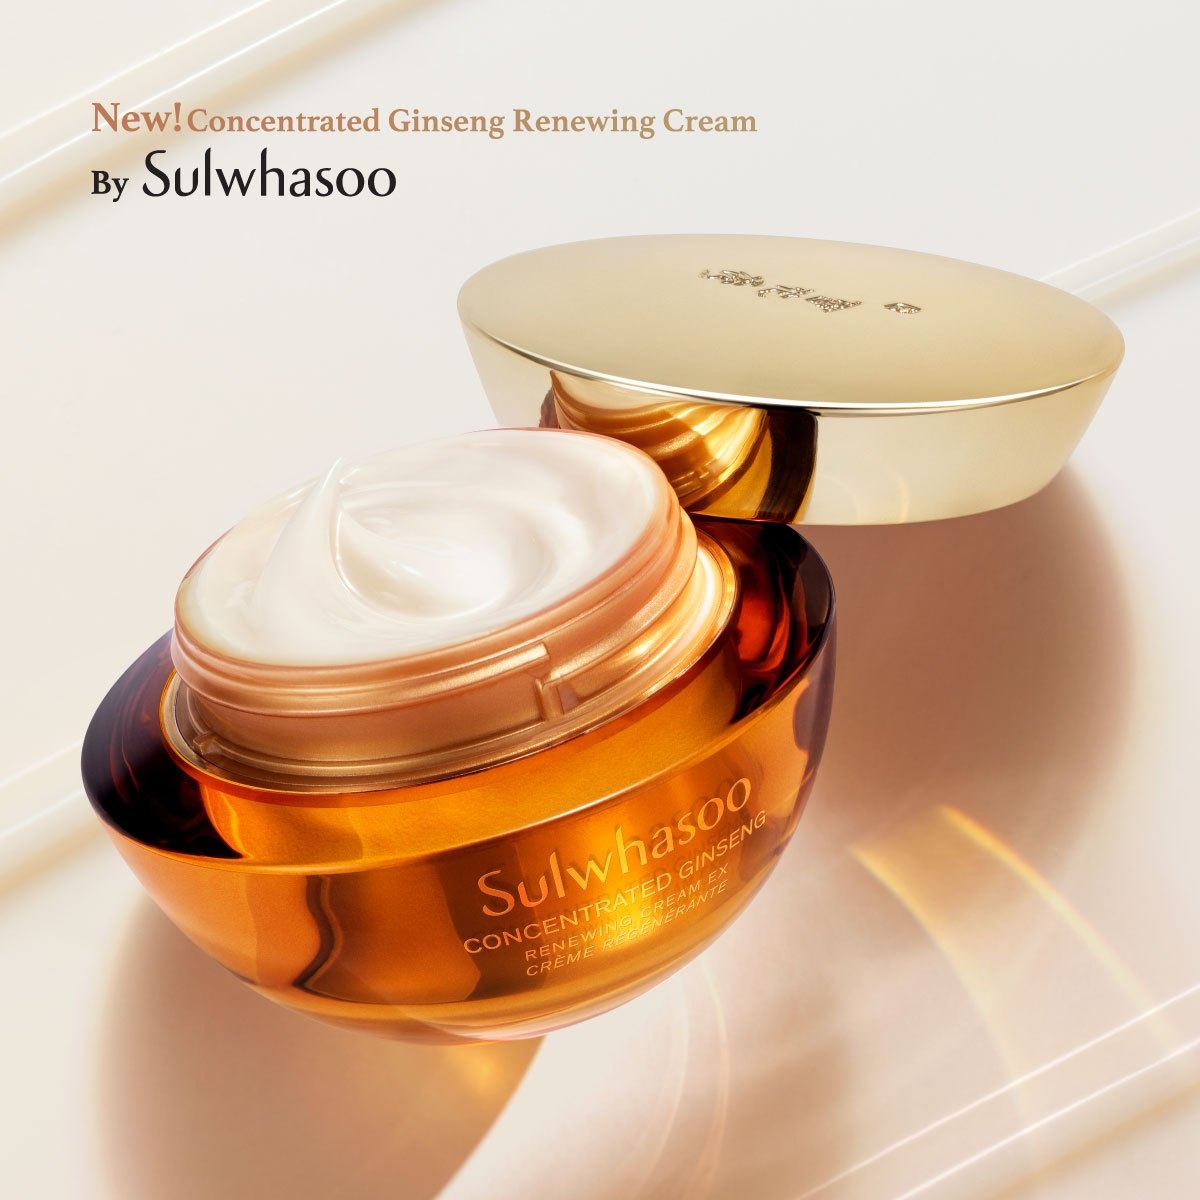 Sulwhasoo Concentrated Ginseng Renewing Cream Ex Classic